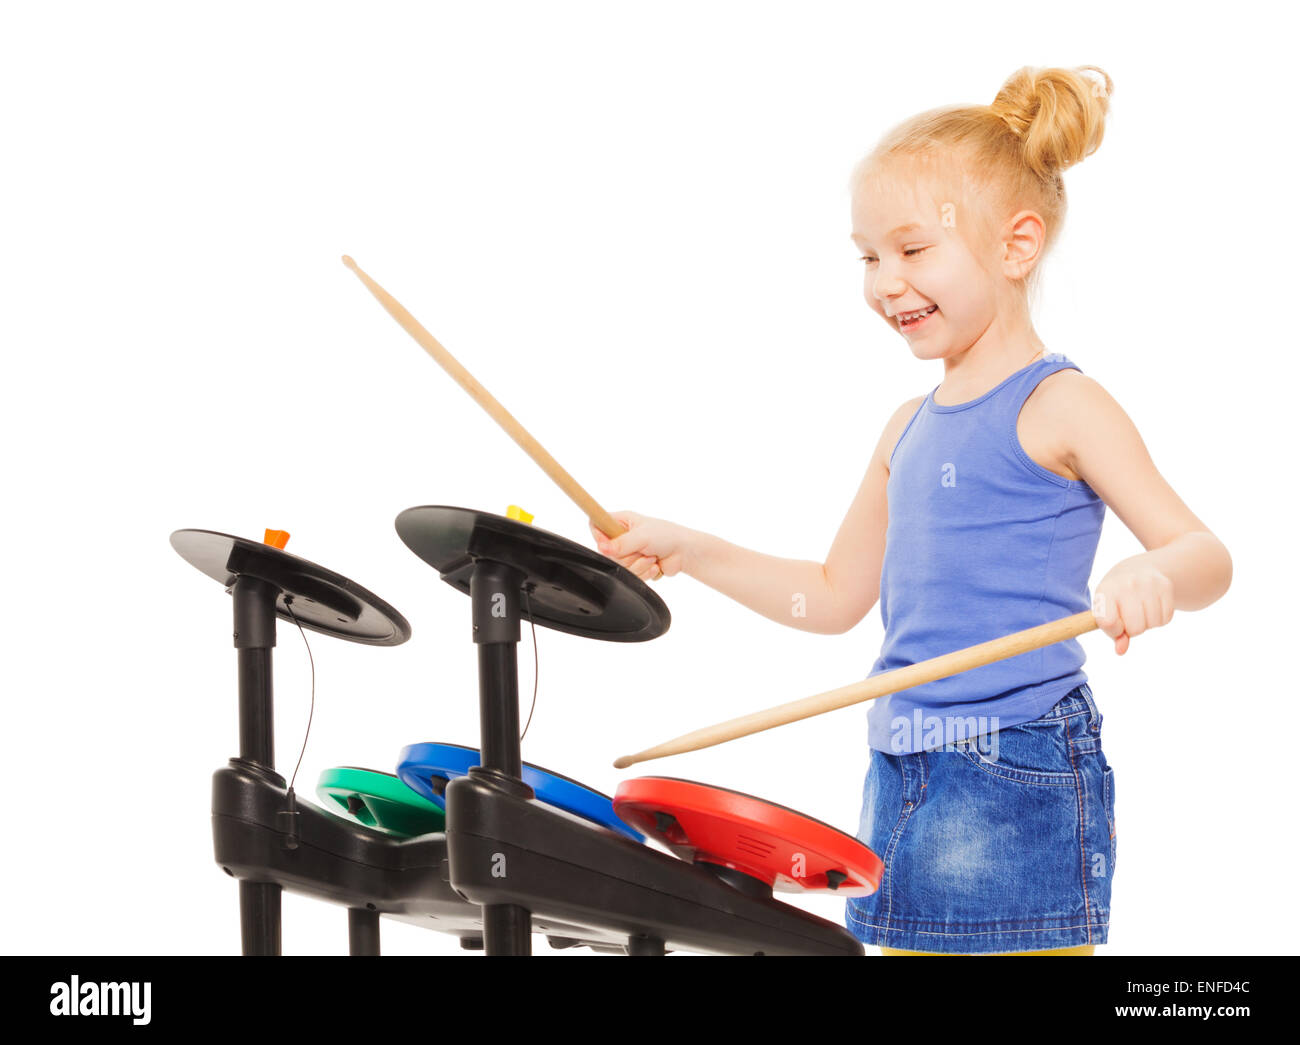 Cute small girl playing with drumsticks on cymbals Stock Photo